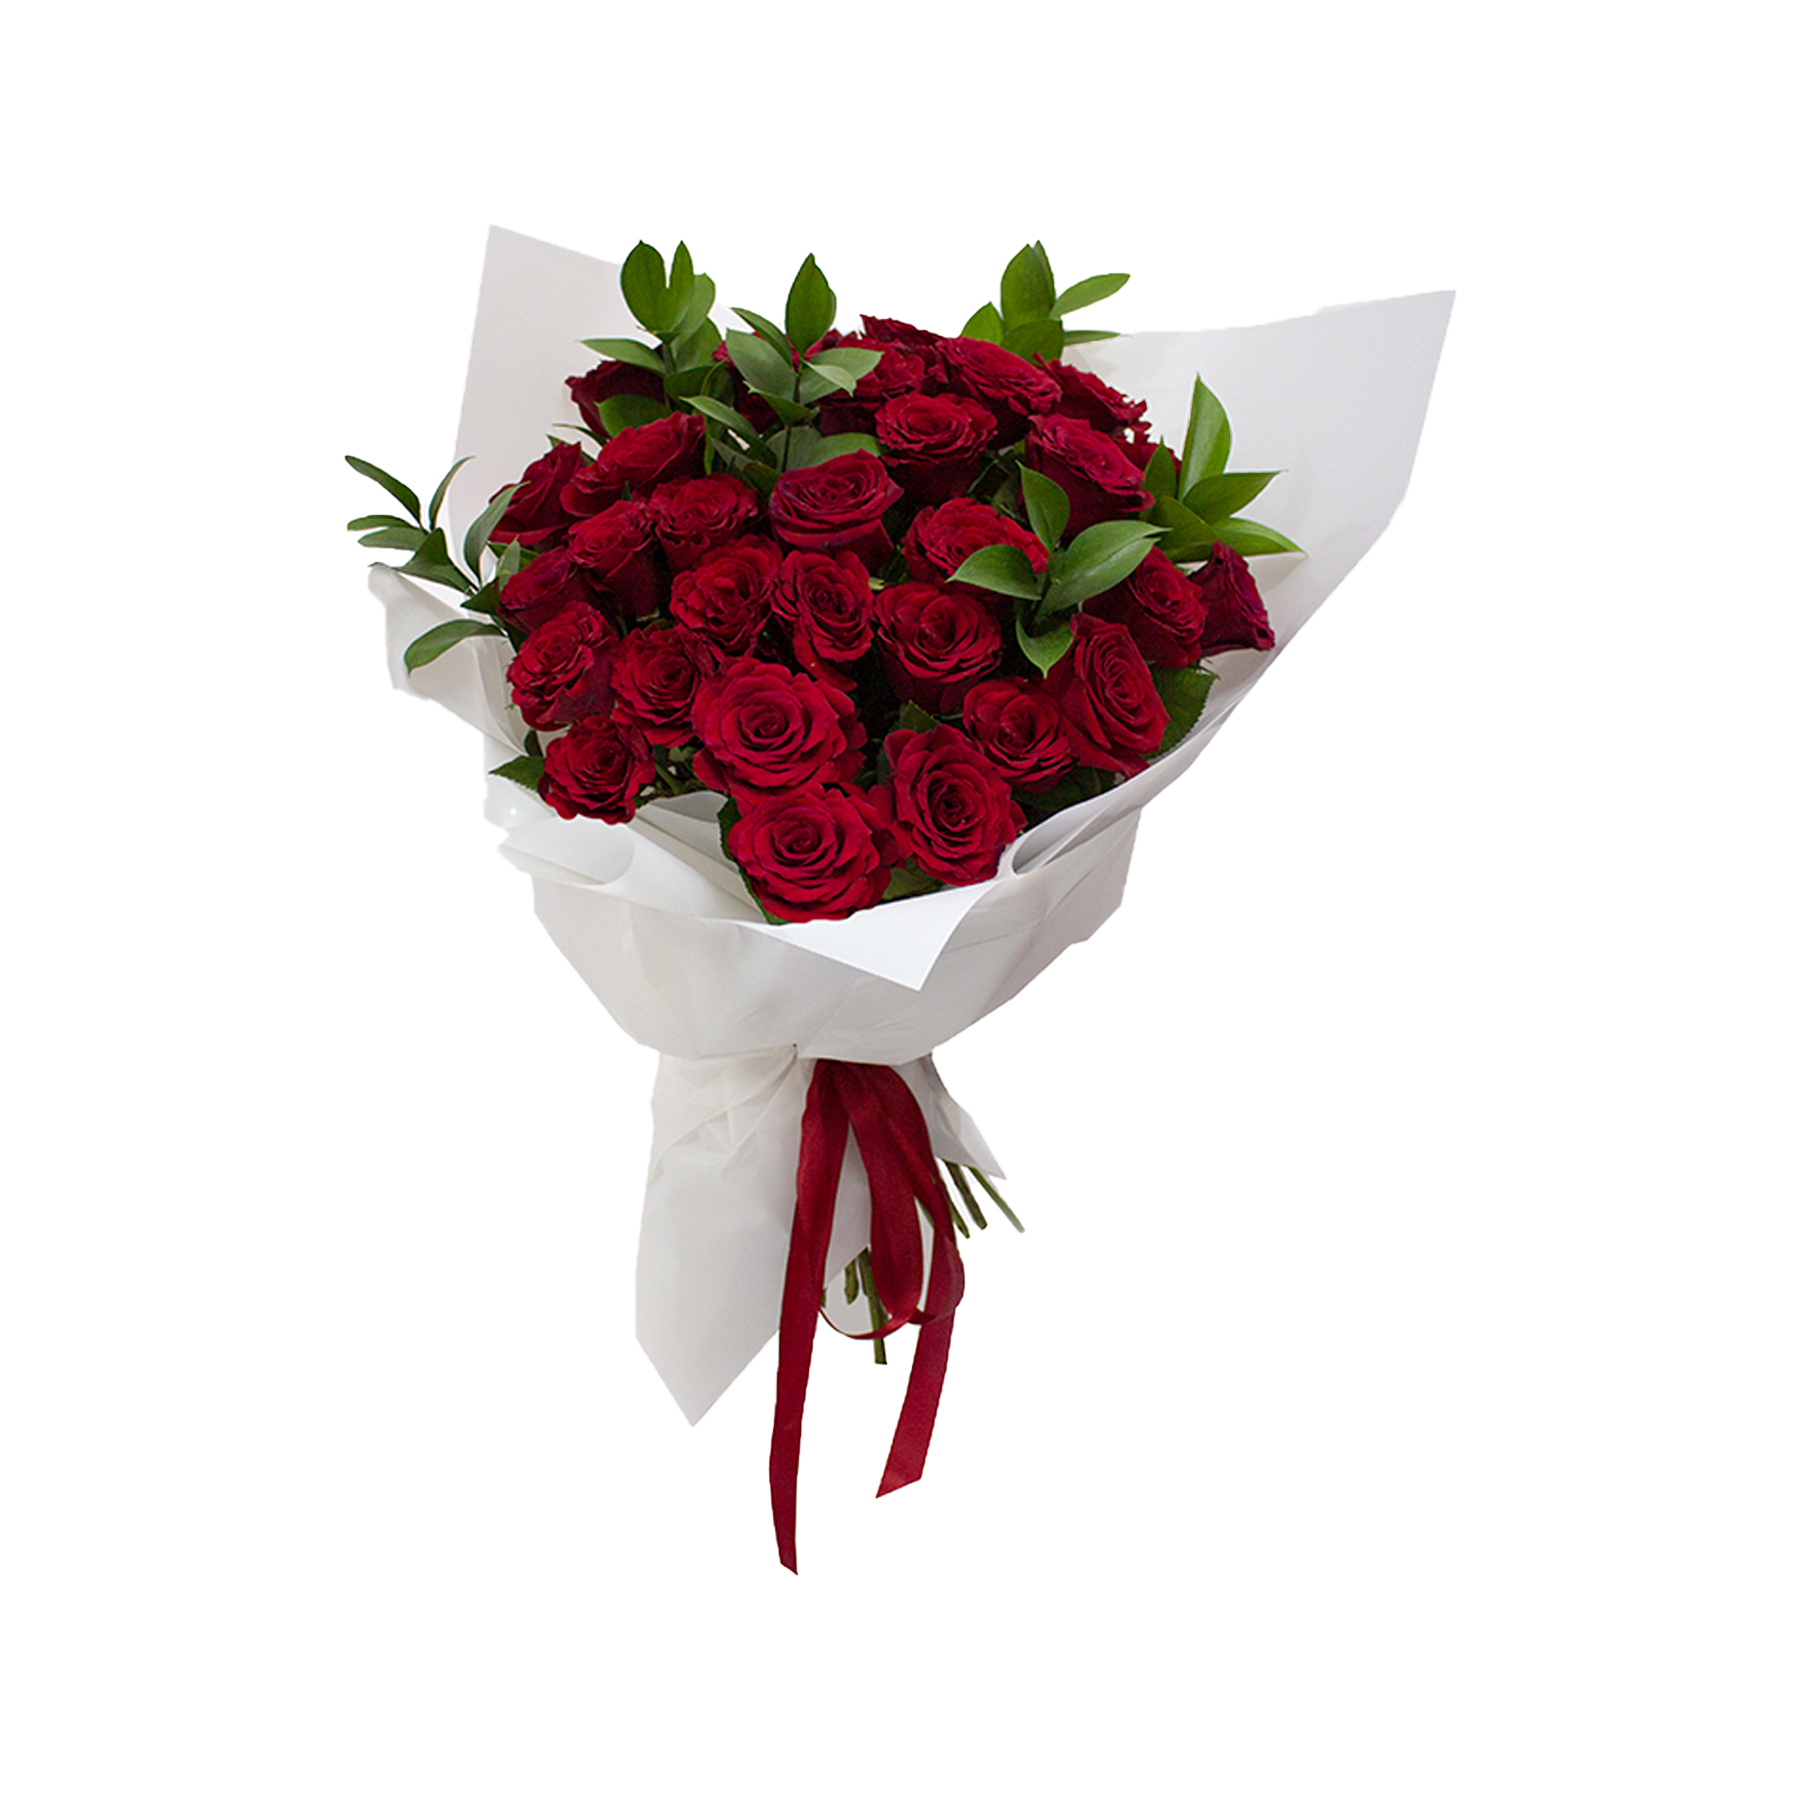 bouqute-of-red-roses-30-pcs-with-white-wrapping2